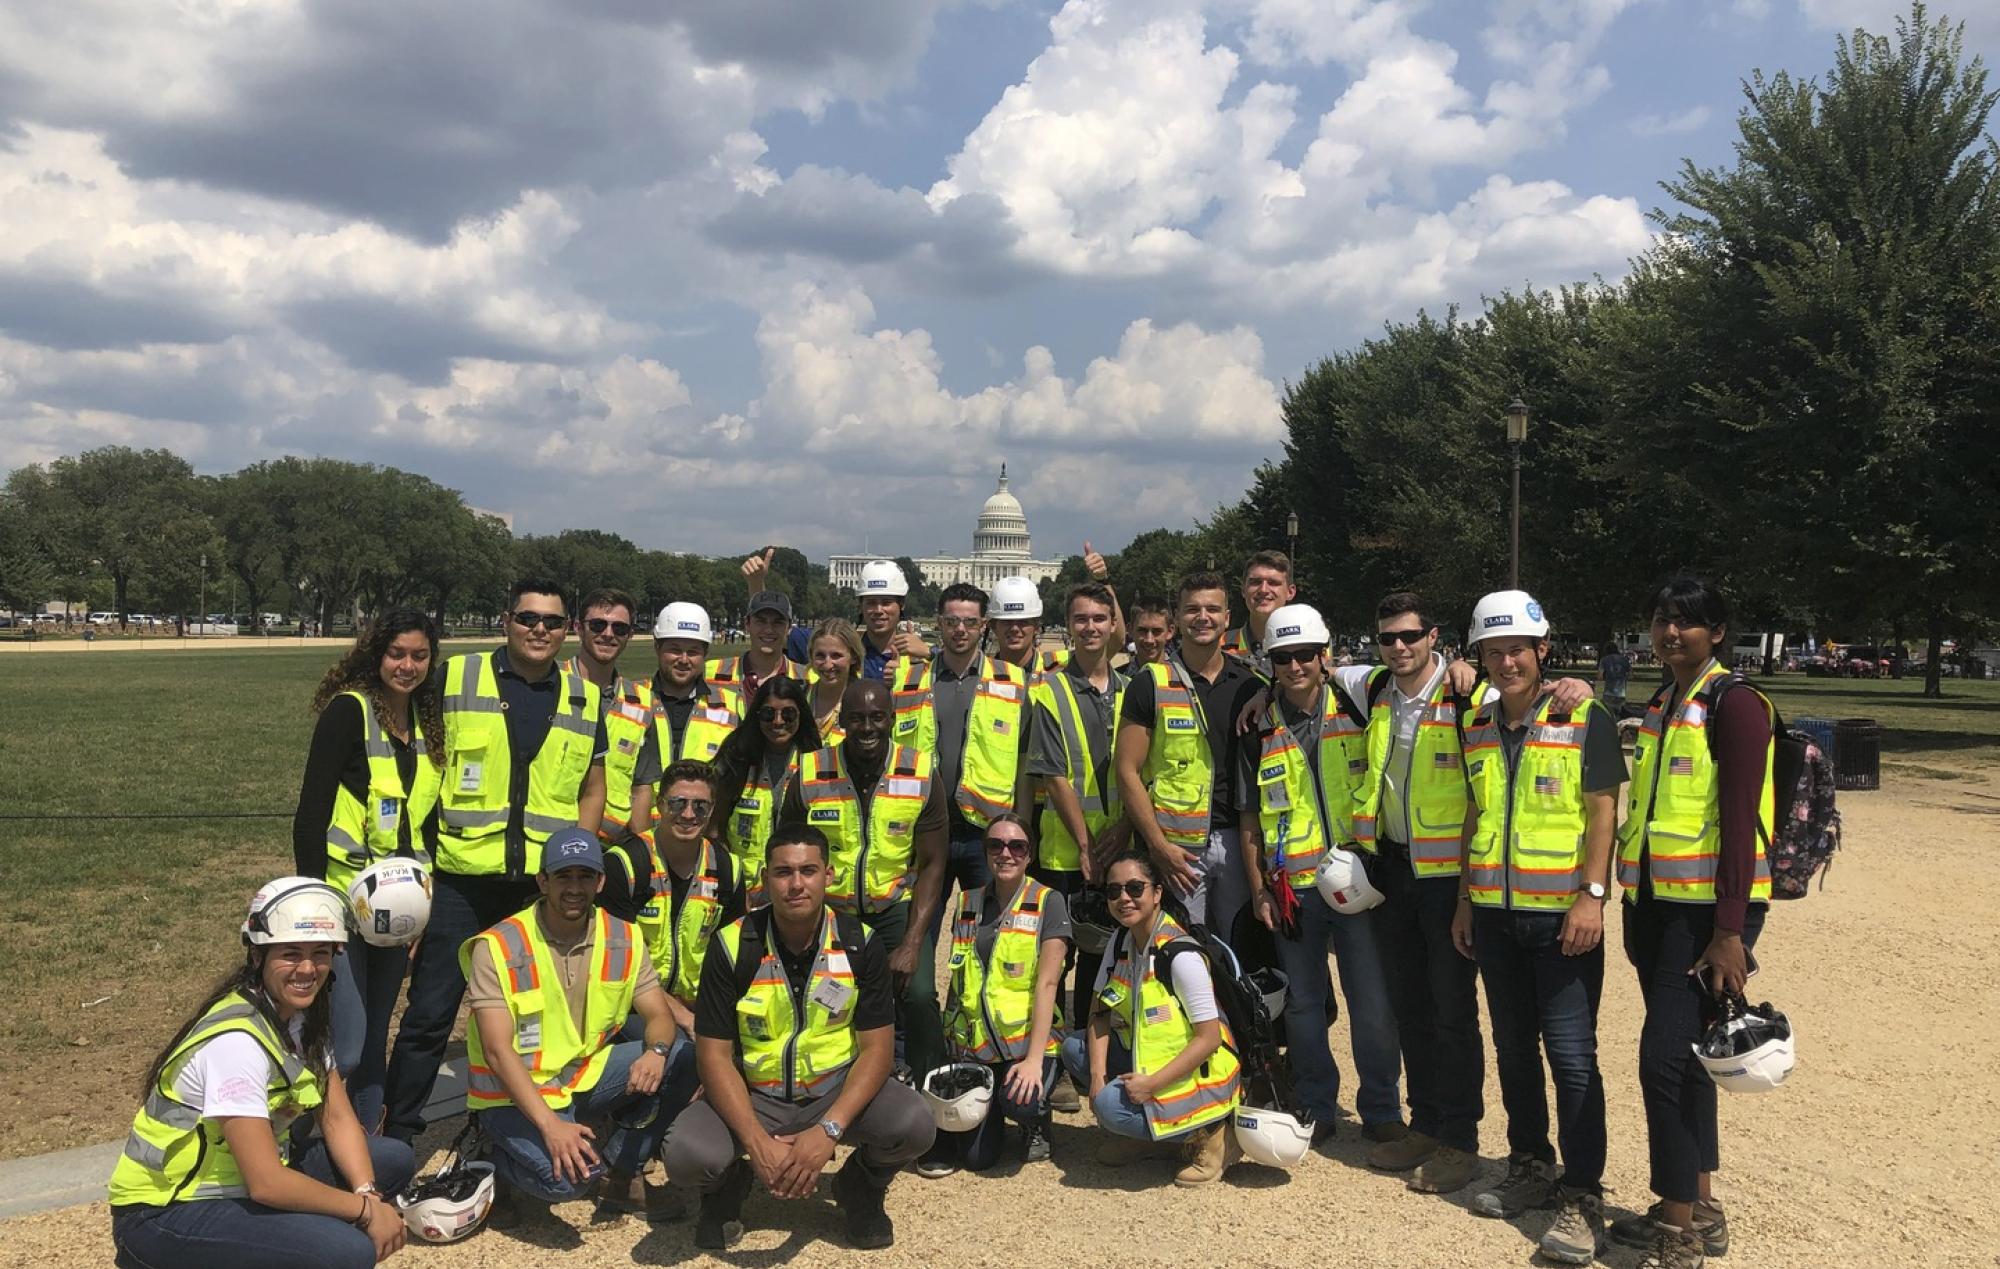 A group of Clark Summer Associates wear personal protective equipment (PPE) stand in front of the US Capitol Building on the National Mall